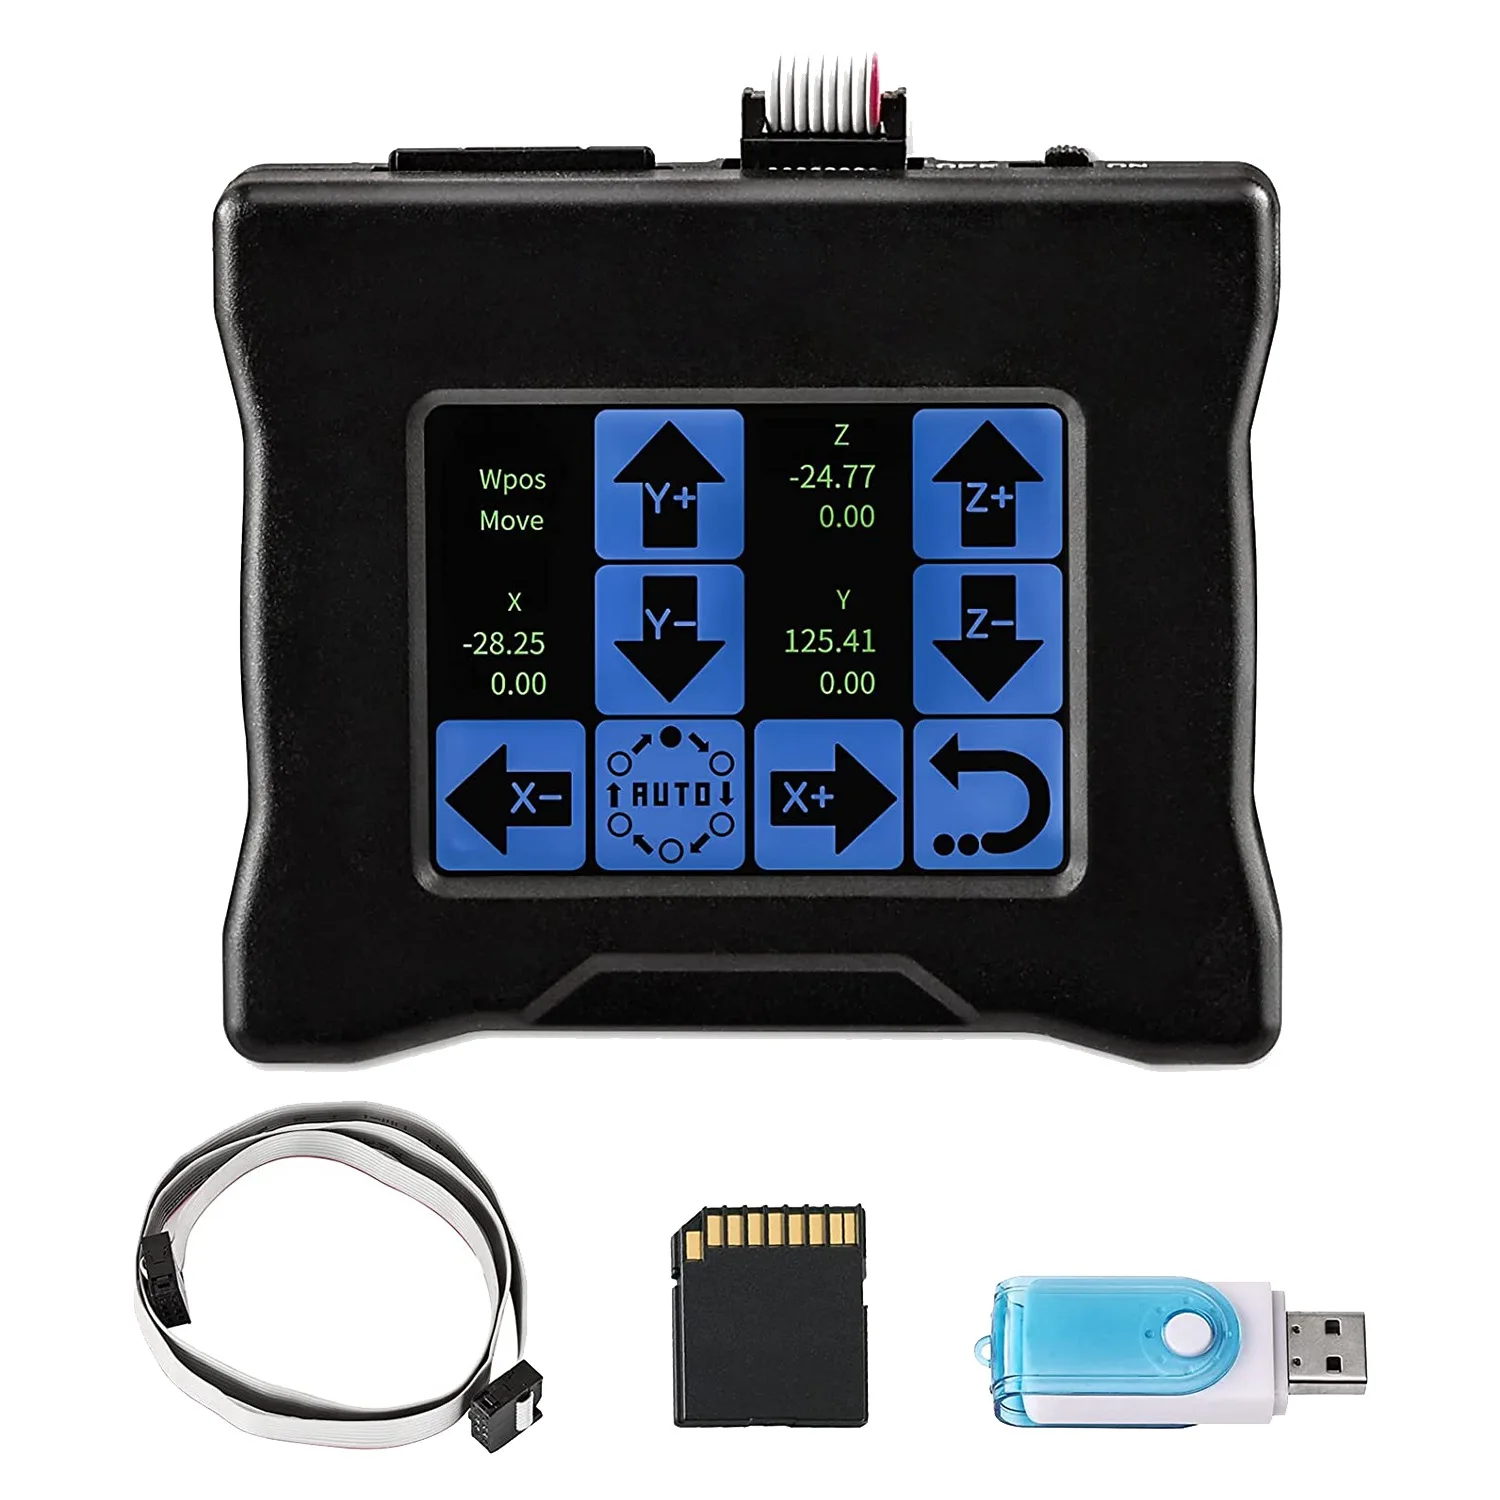 cnc-offline-controller-with-touchscreen-cnc-router-offline-control-module-28inch-grbl-offline-controller